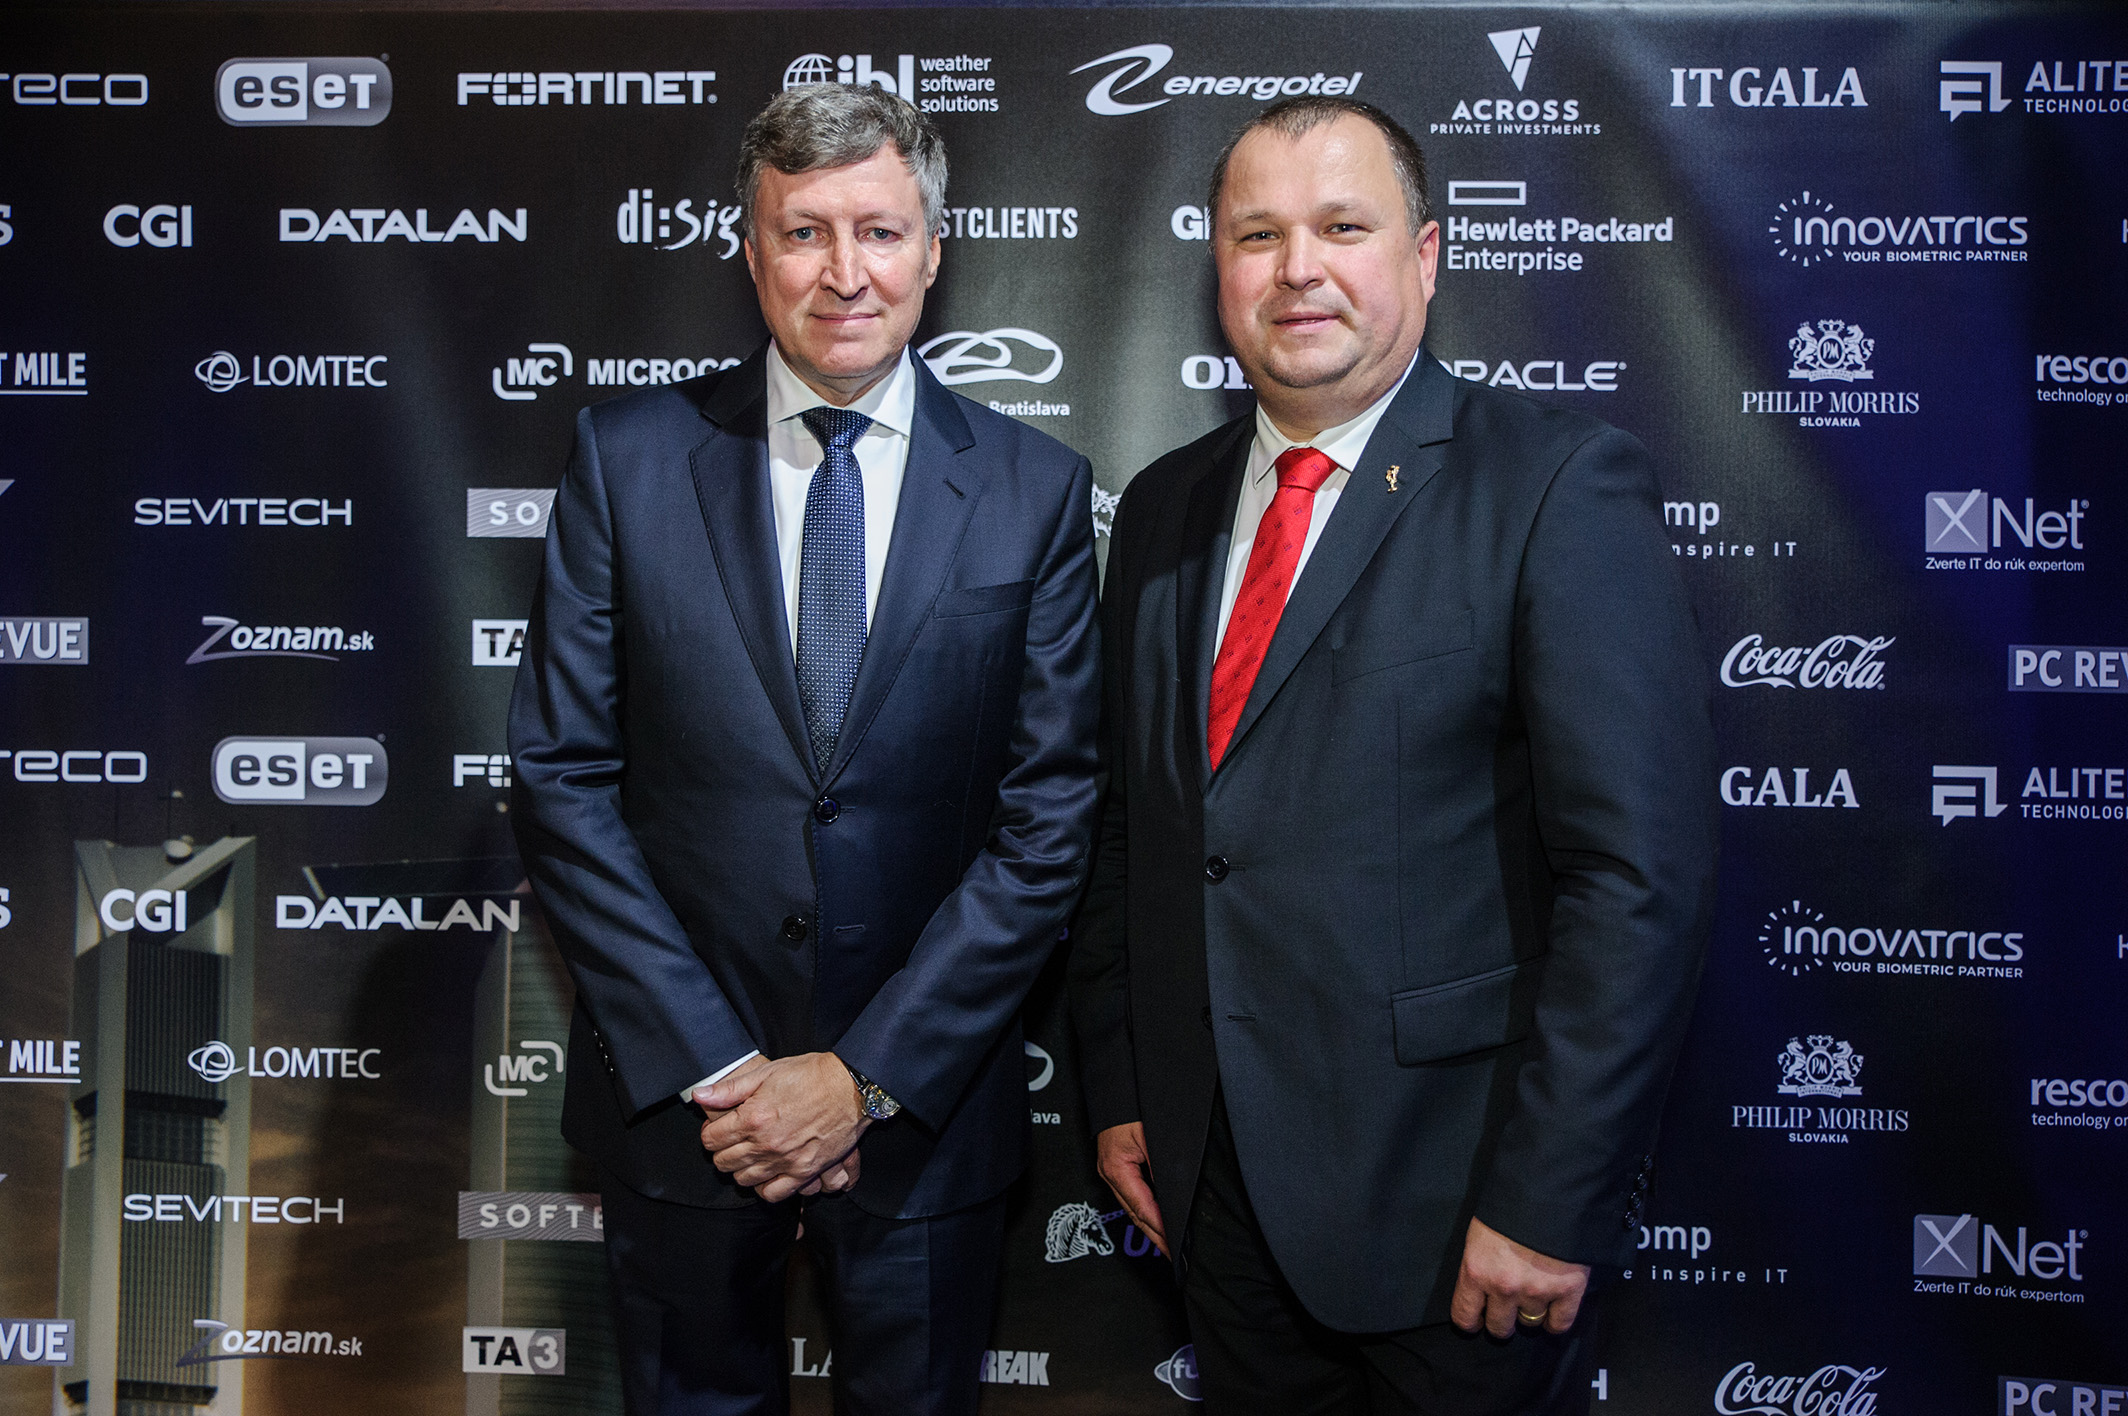 ENERGOTEL, a.s. A GOLDEN PARTNER OF THE IT GALA 2018